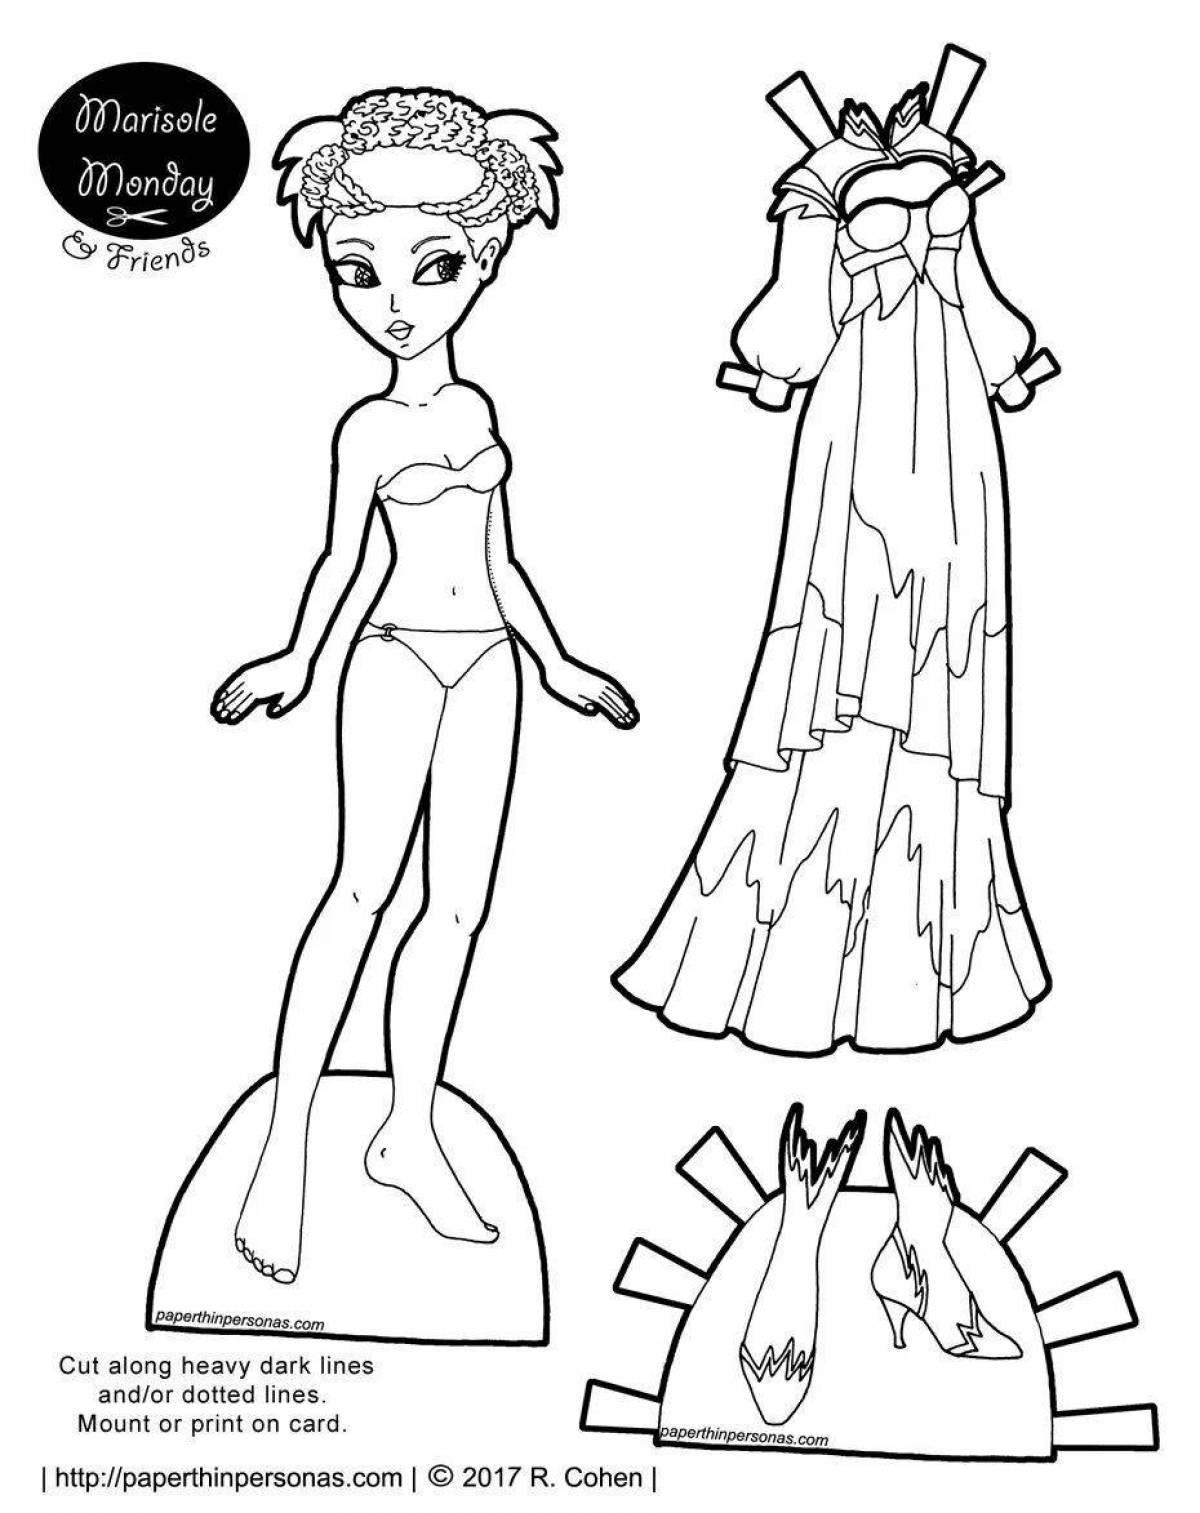 Adorable Elsa paper doll coloring book with clothes to cut out